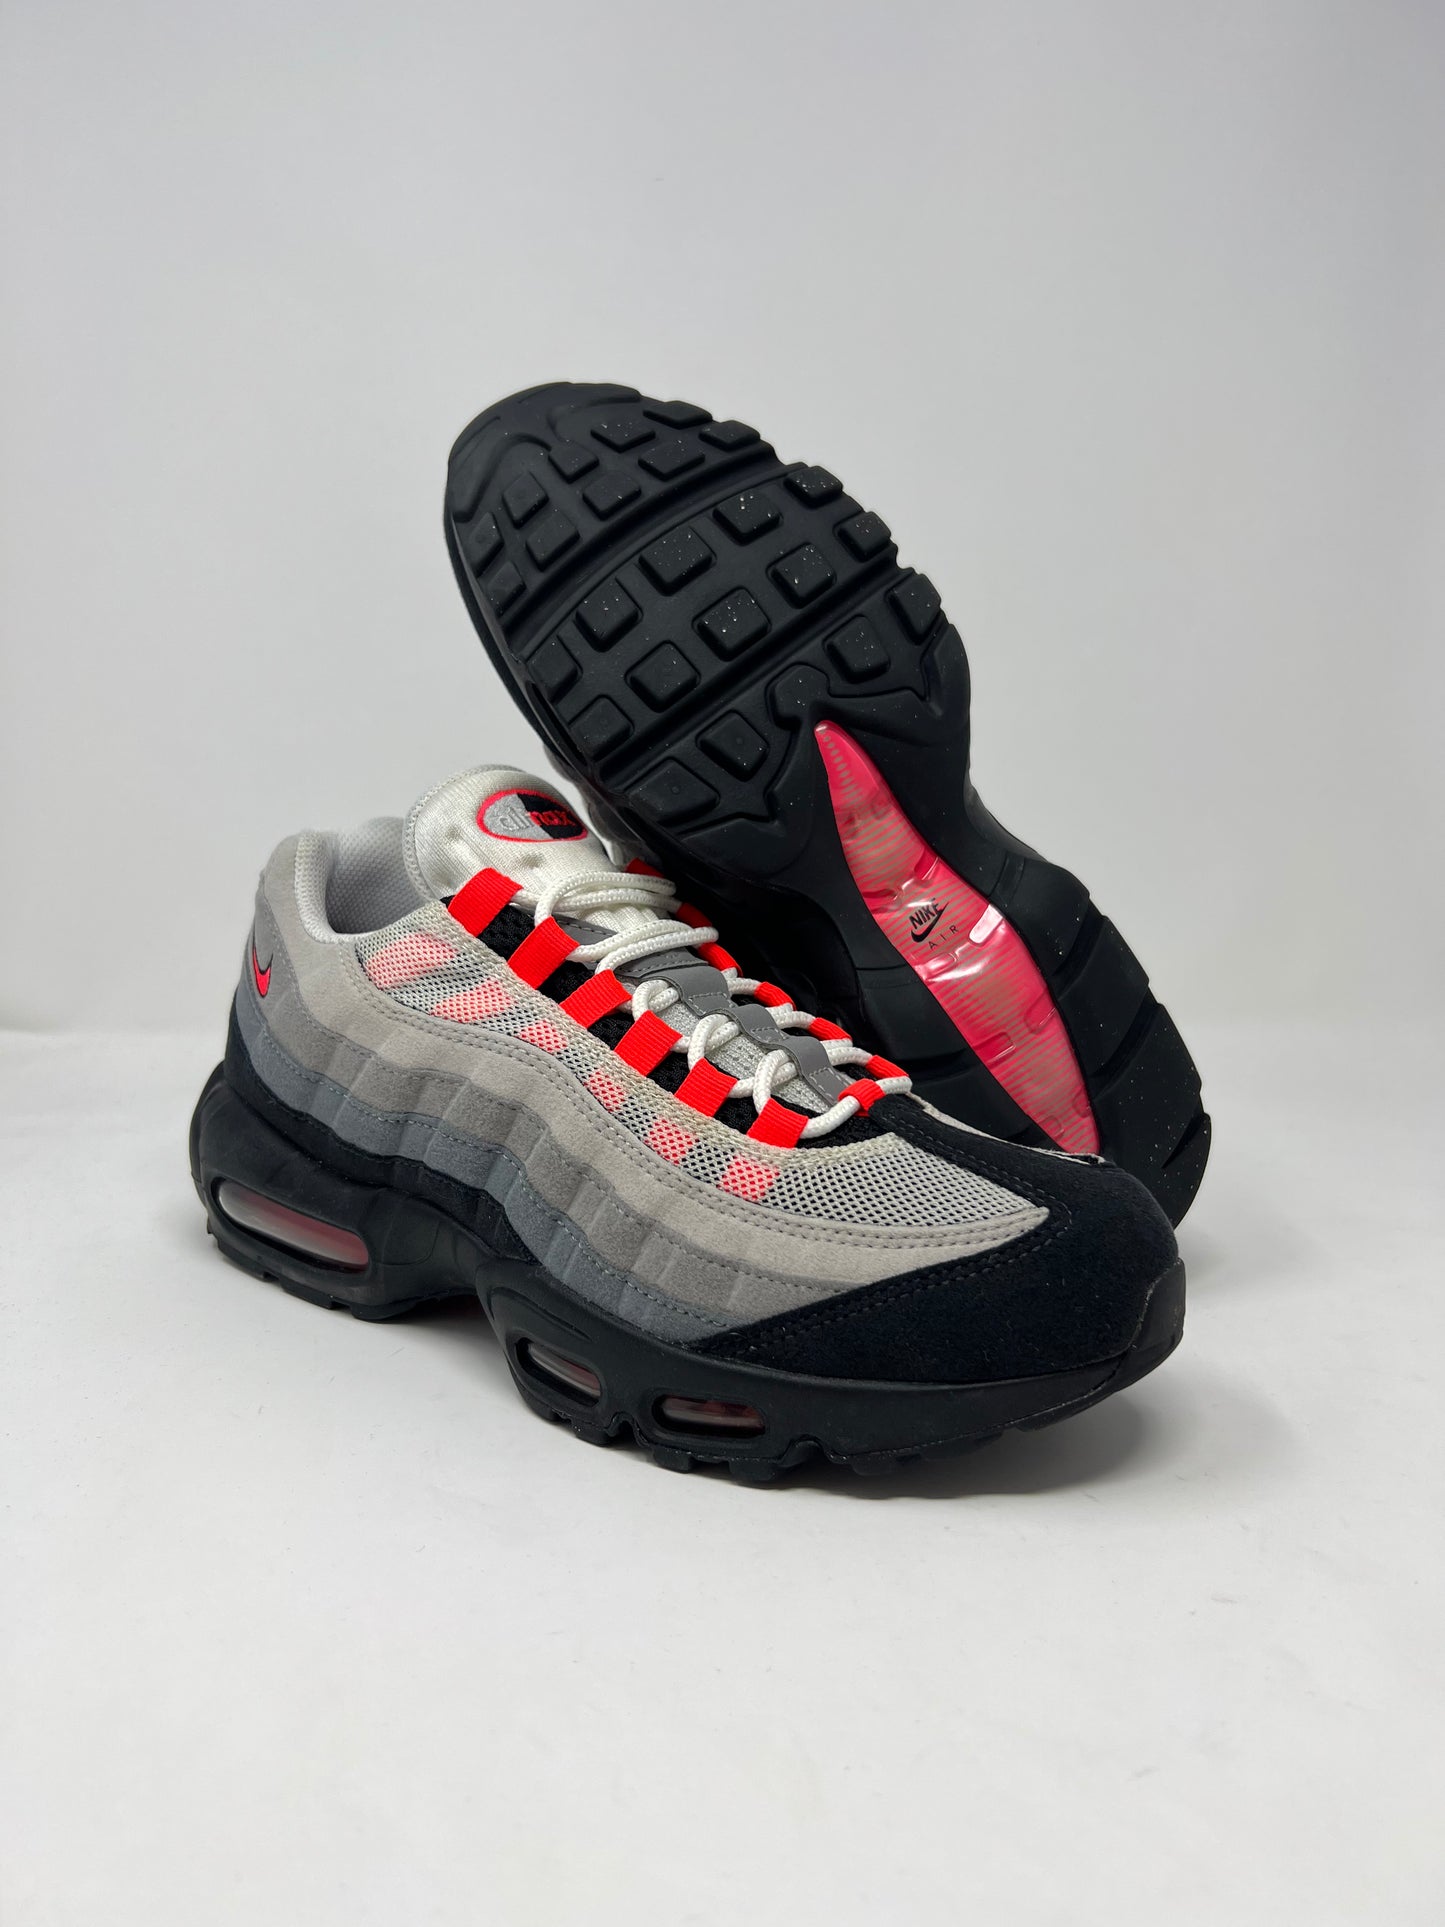 Nike Air Max 95 2017 Solar Red US Exclusive UK8